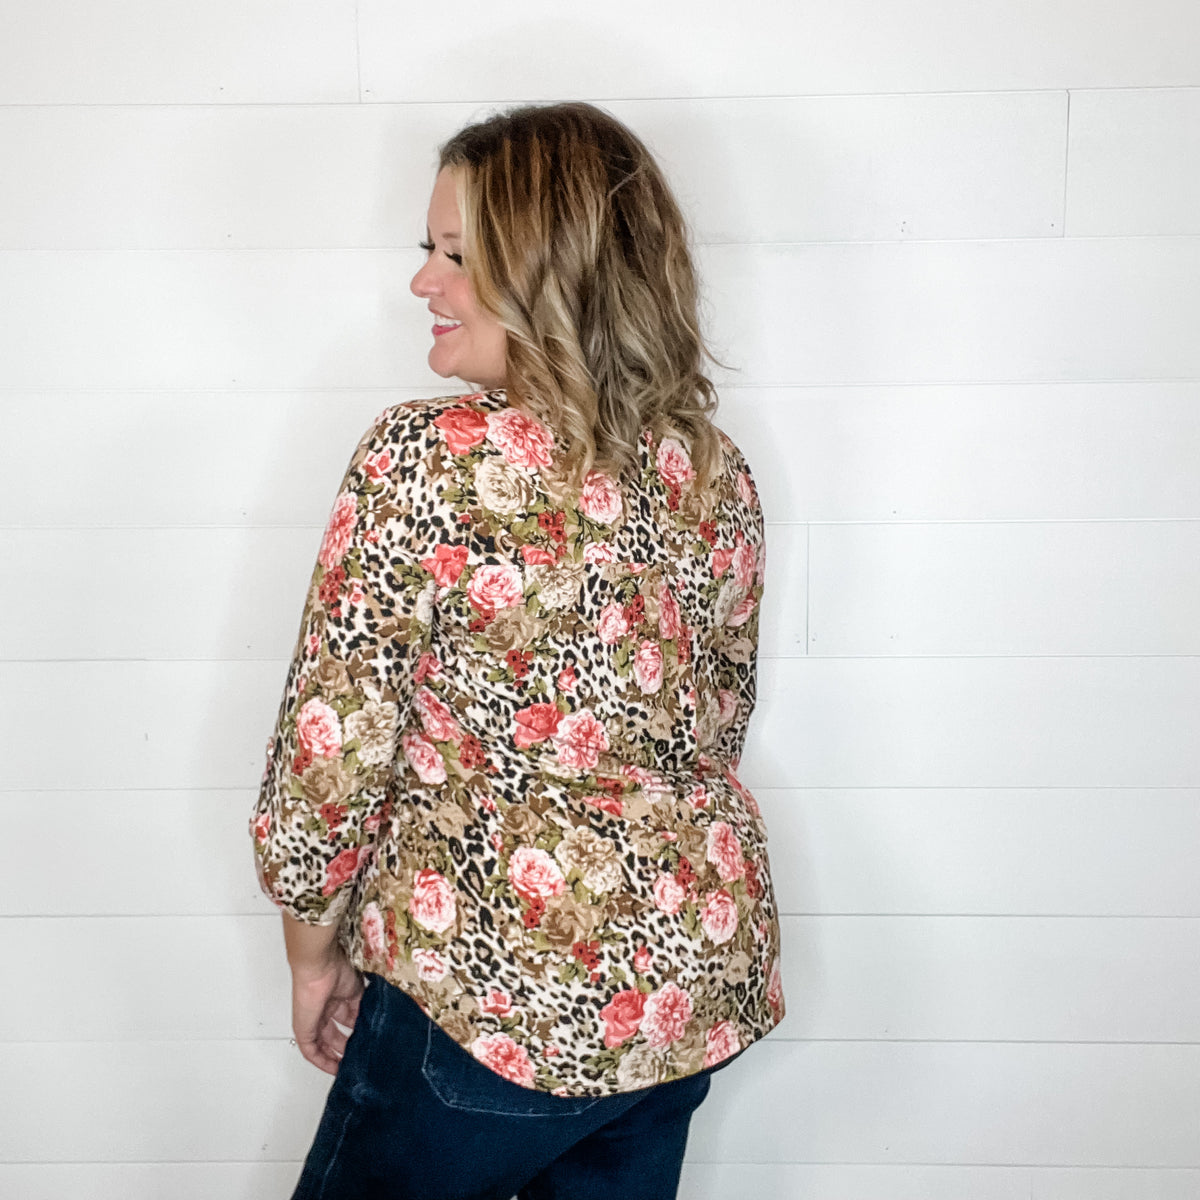 "South" Animal and Floral Lizzy 3/4 Sleeve Split Neck